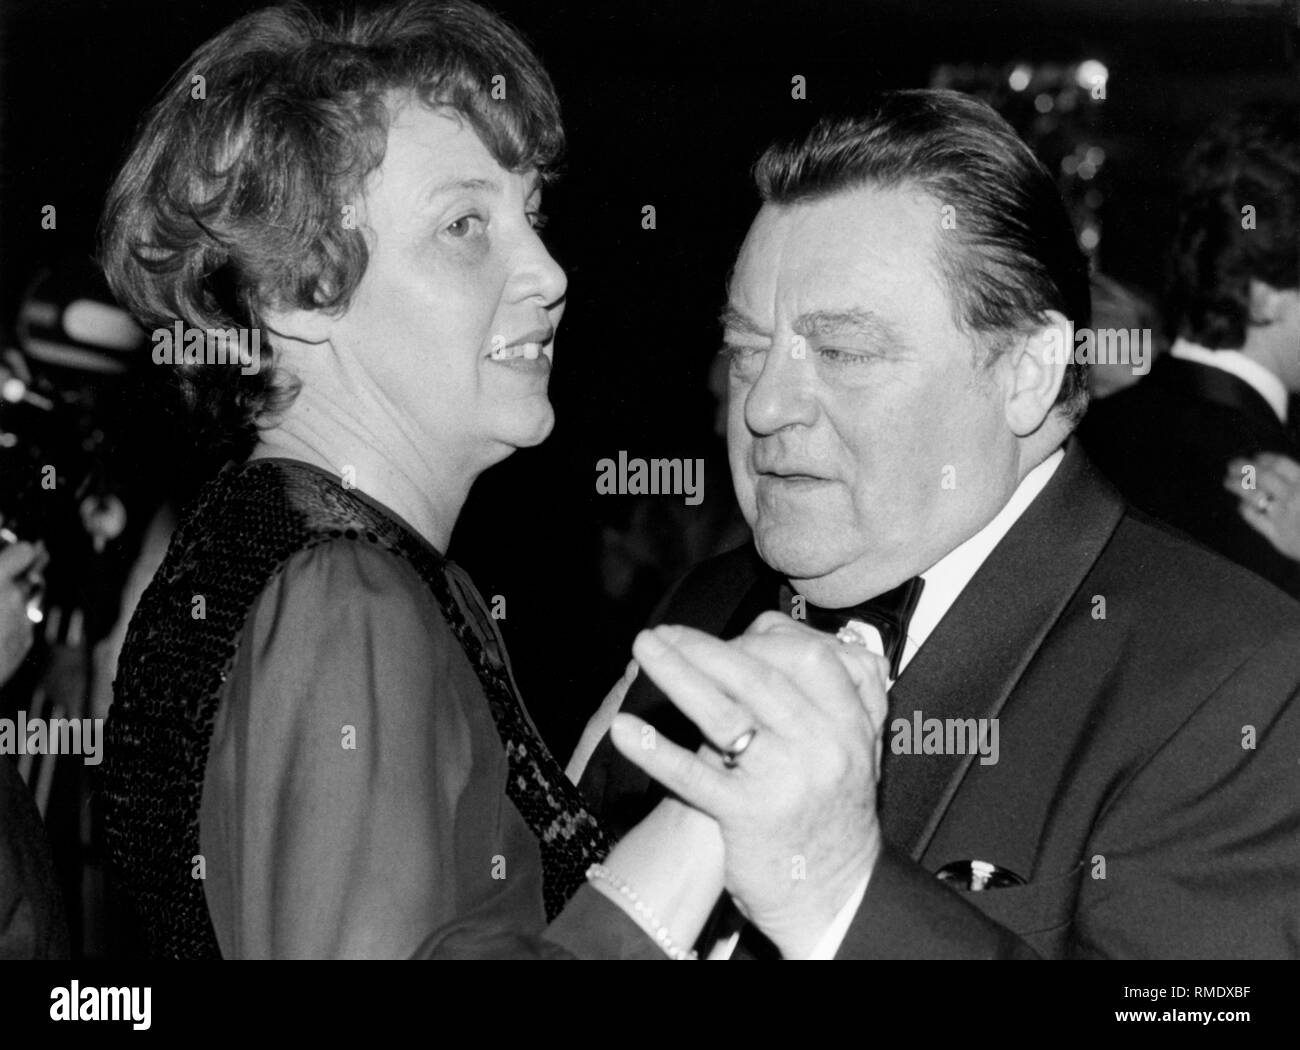 Bavarian Minister President and chancellor candidate of the Union, Franz Josef Strauss, dances with his wife Marianne Strauss on the occasion of the awarding of the Karl-Valentin-Order of the Narrhalla to Bruno Kreisky, federal chancellor of Austria. Stock Photo